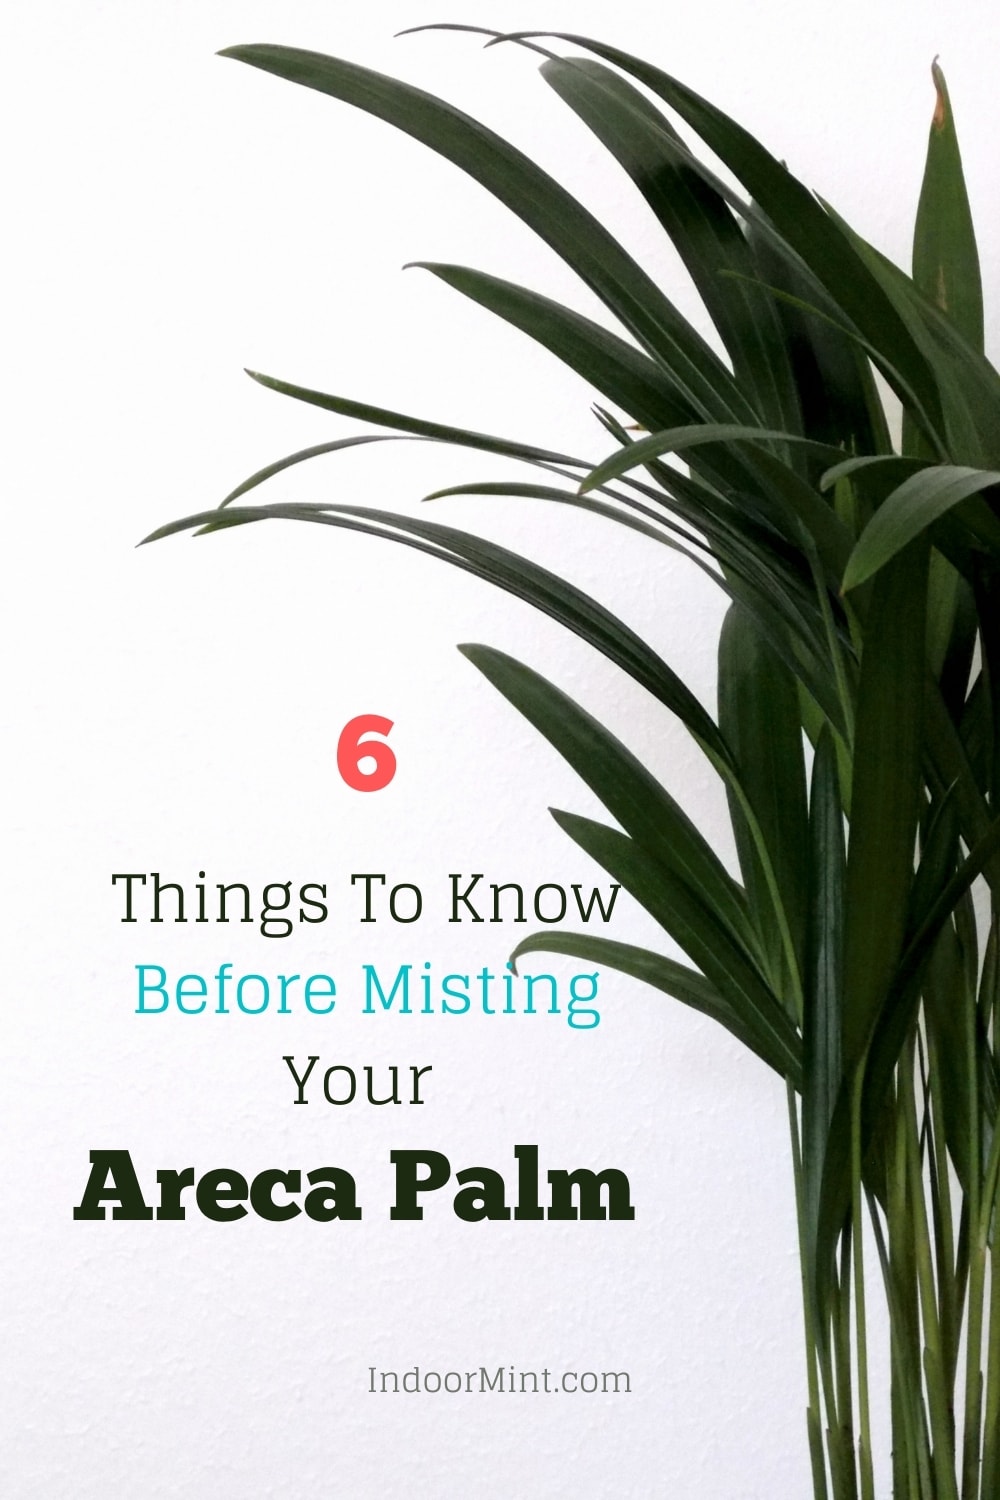 areca palm misting guide cover image